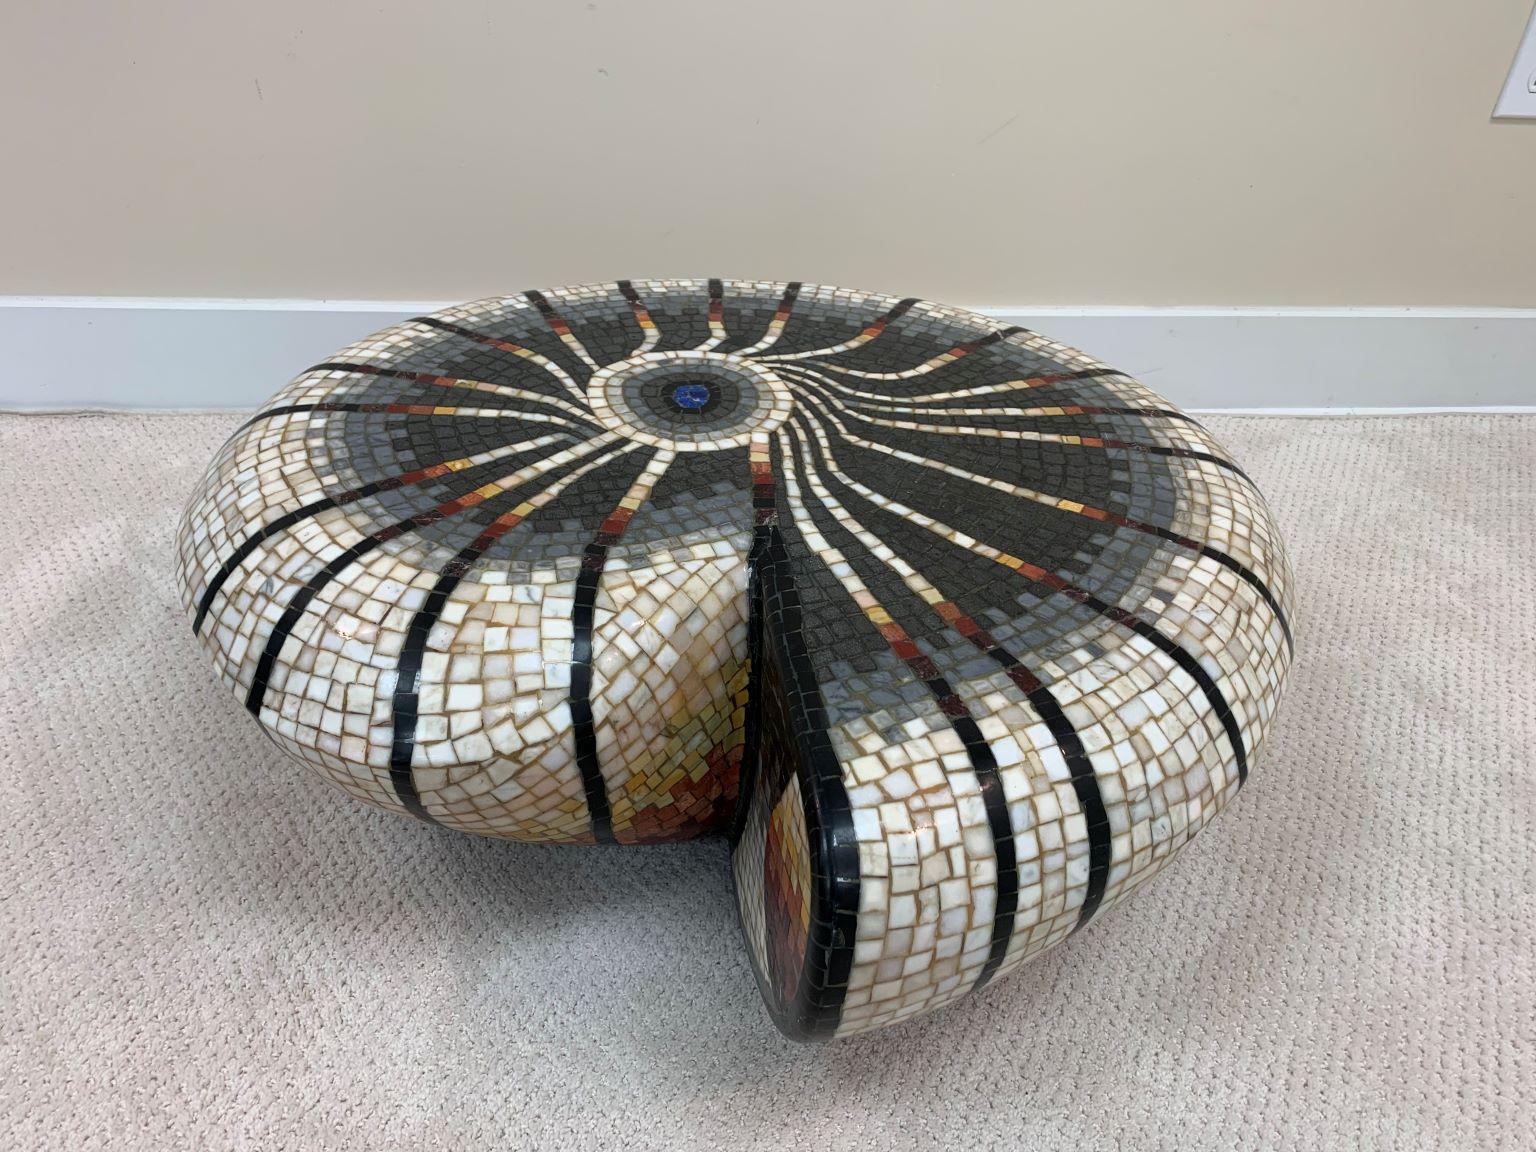 Mid Century Italian mosaic tile cocktail table or floor sculpture in the shape of a snail by Massimiliano Beltrame. Beautiful piece with great color and detail; the table is in excellent vintage condition no signs of chips or cracks. Dimensions 32